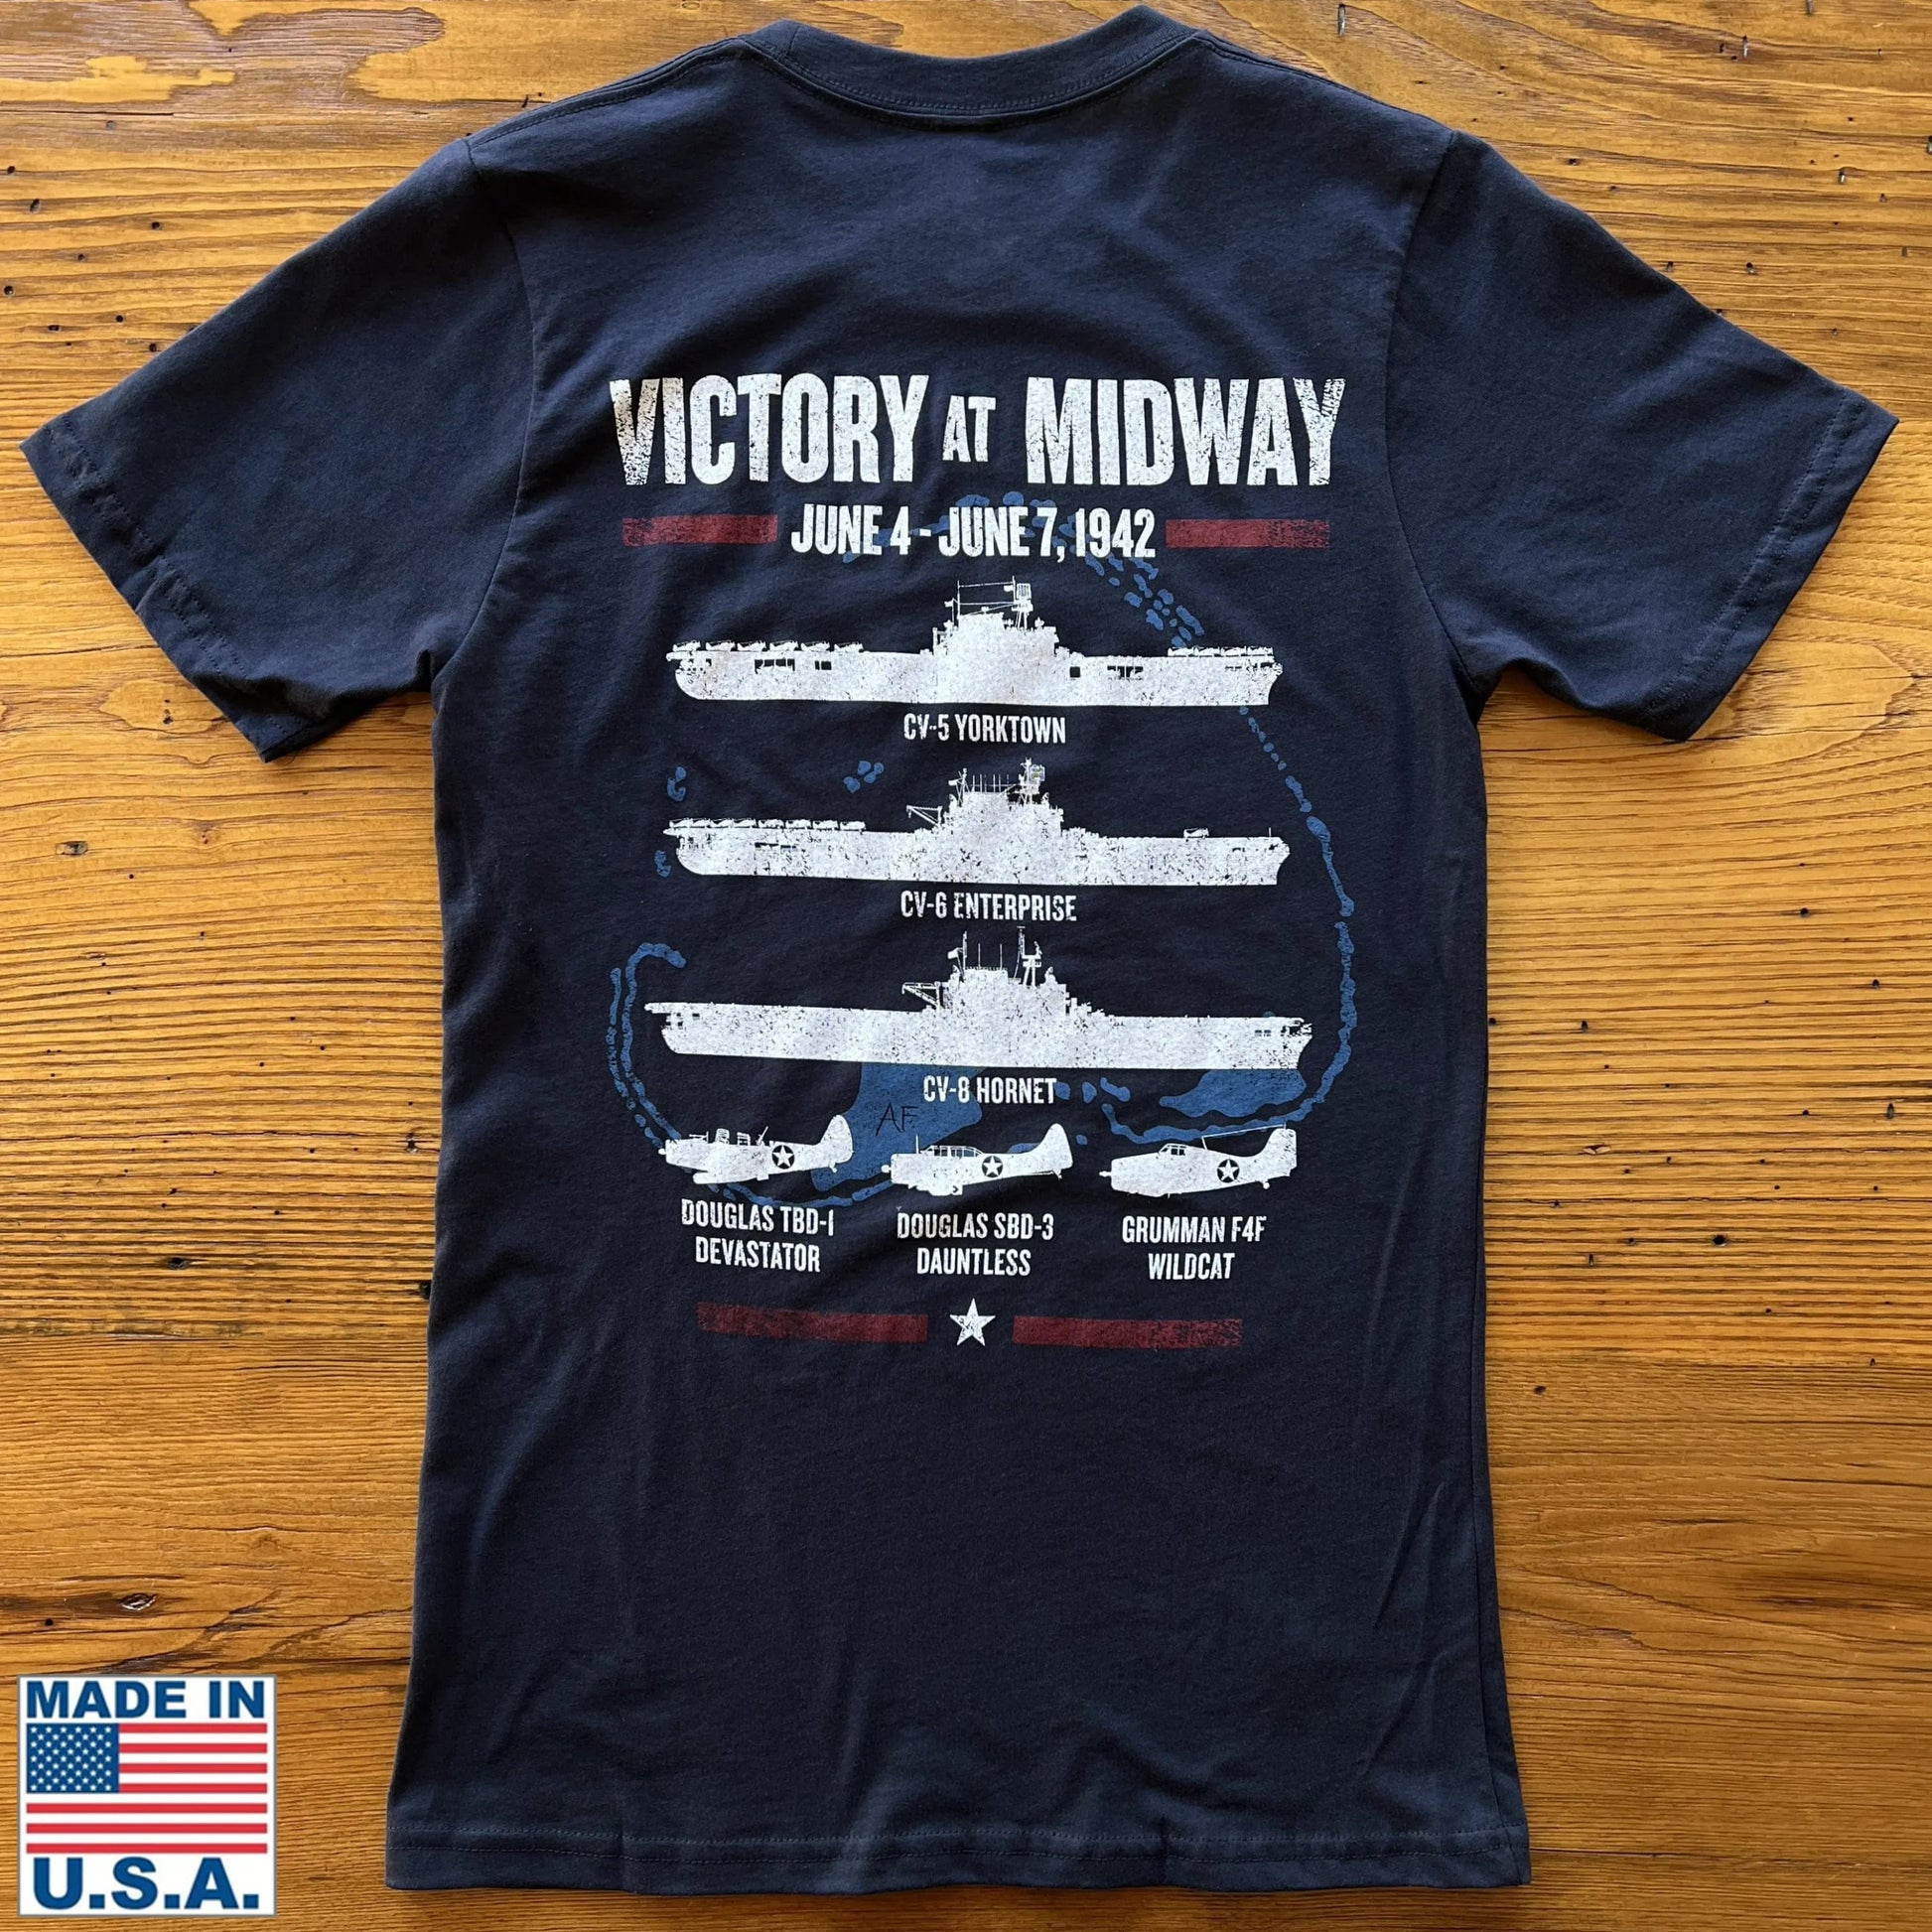 Spænding Tarif vaskepulver Victory at Midway" Shirt | Shirt for Military History Lovers – The History  List